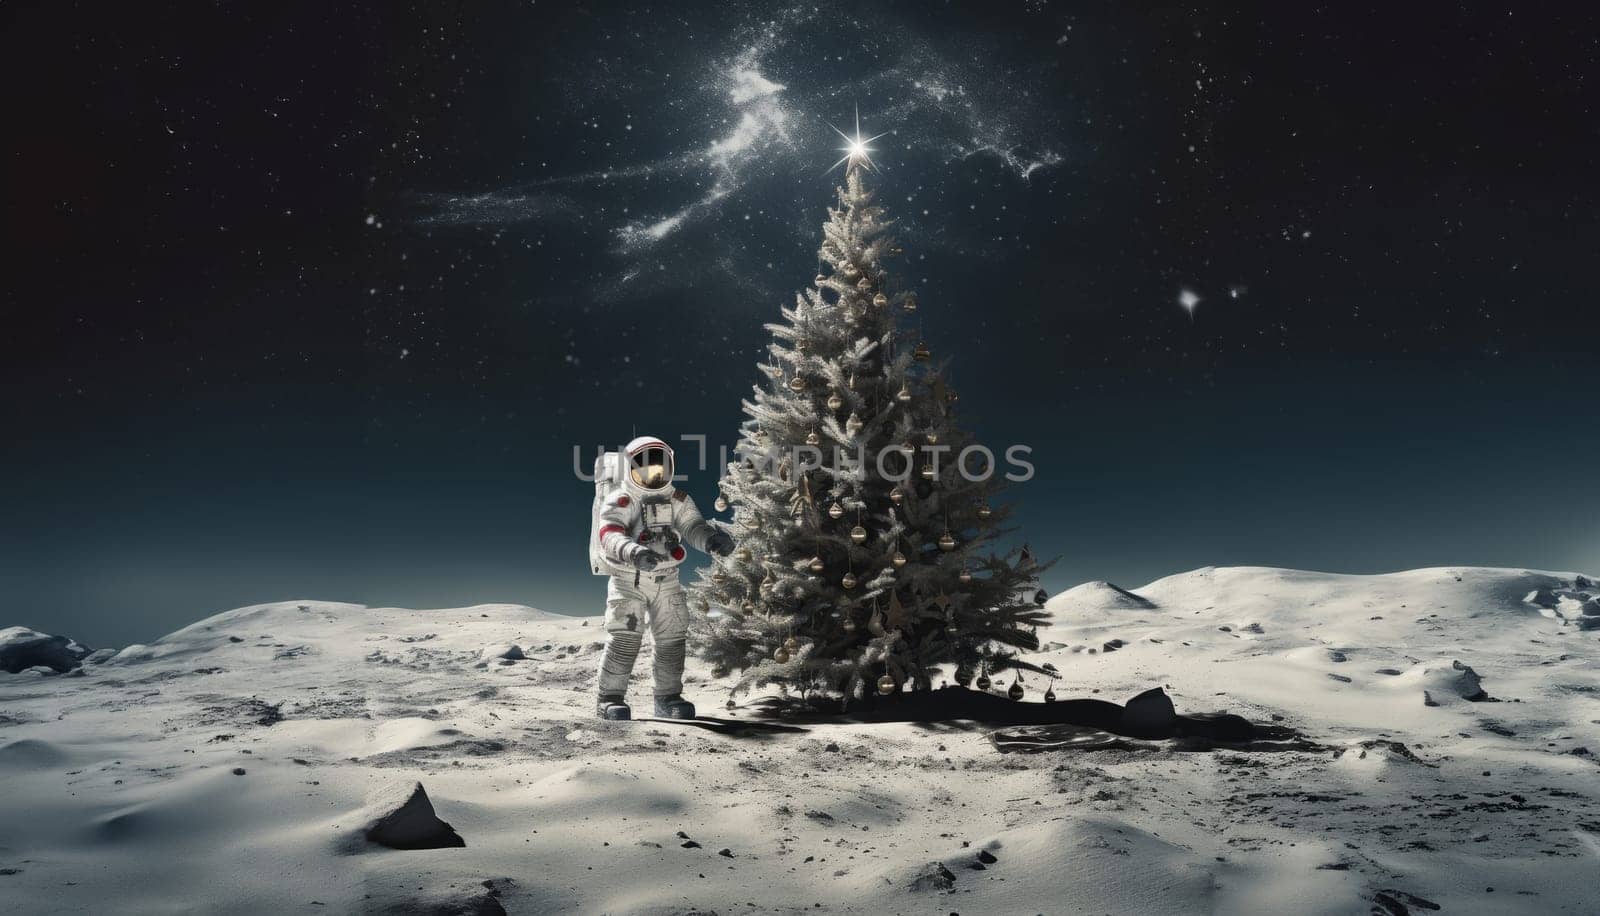 An astronaut on Mars celebrates the holiday season by decorating a Christmas tree, bringing a festive spirit to the distant red planet.Generated image by dotshock